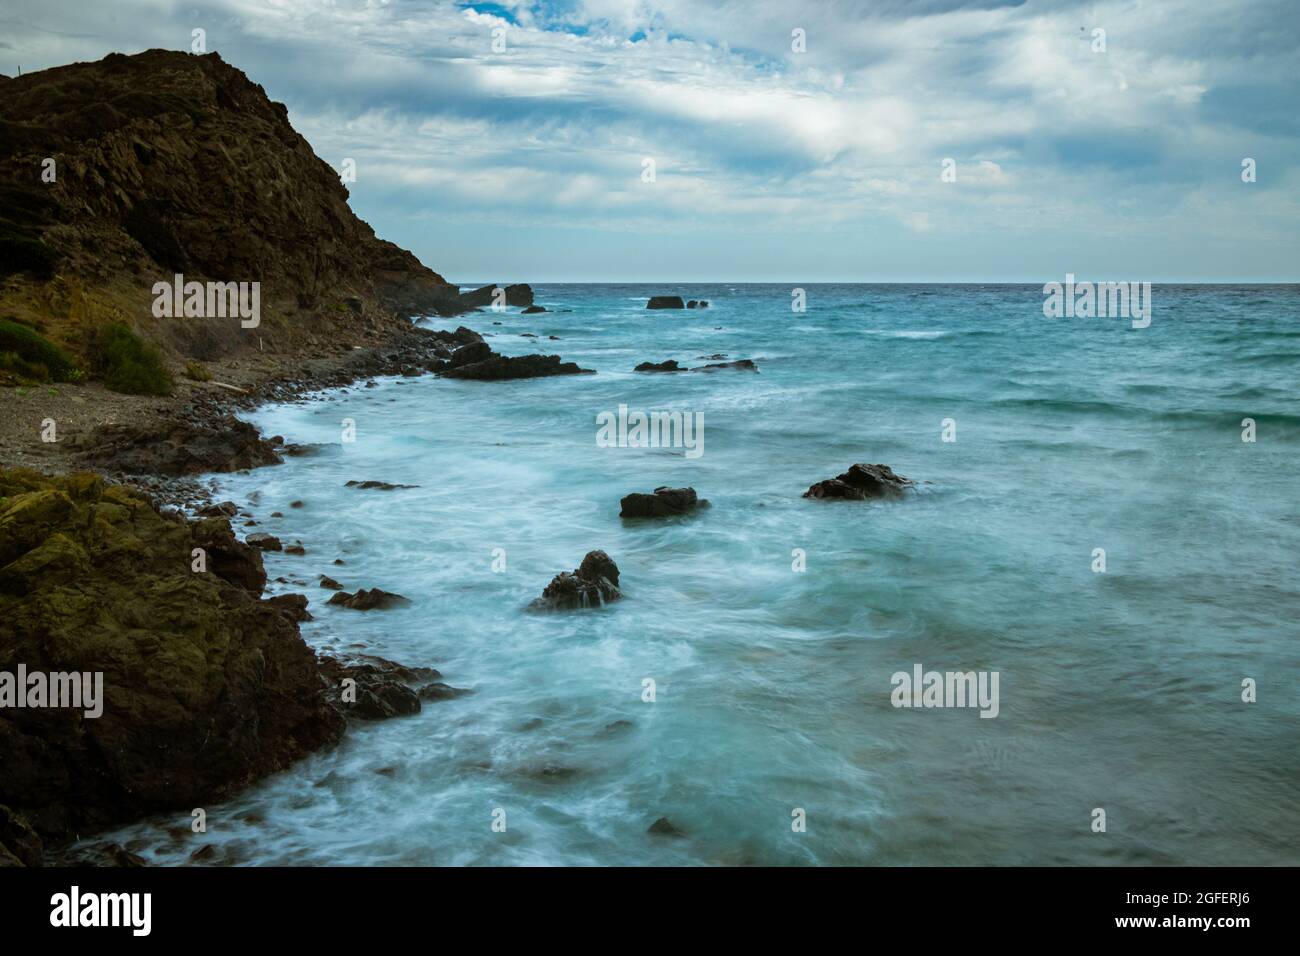 rocky beach landscape during storm with cloudy sky. Dramatic long exposure of sea waves breaking on rocks. Stock Photo